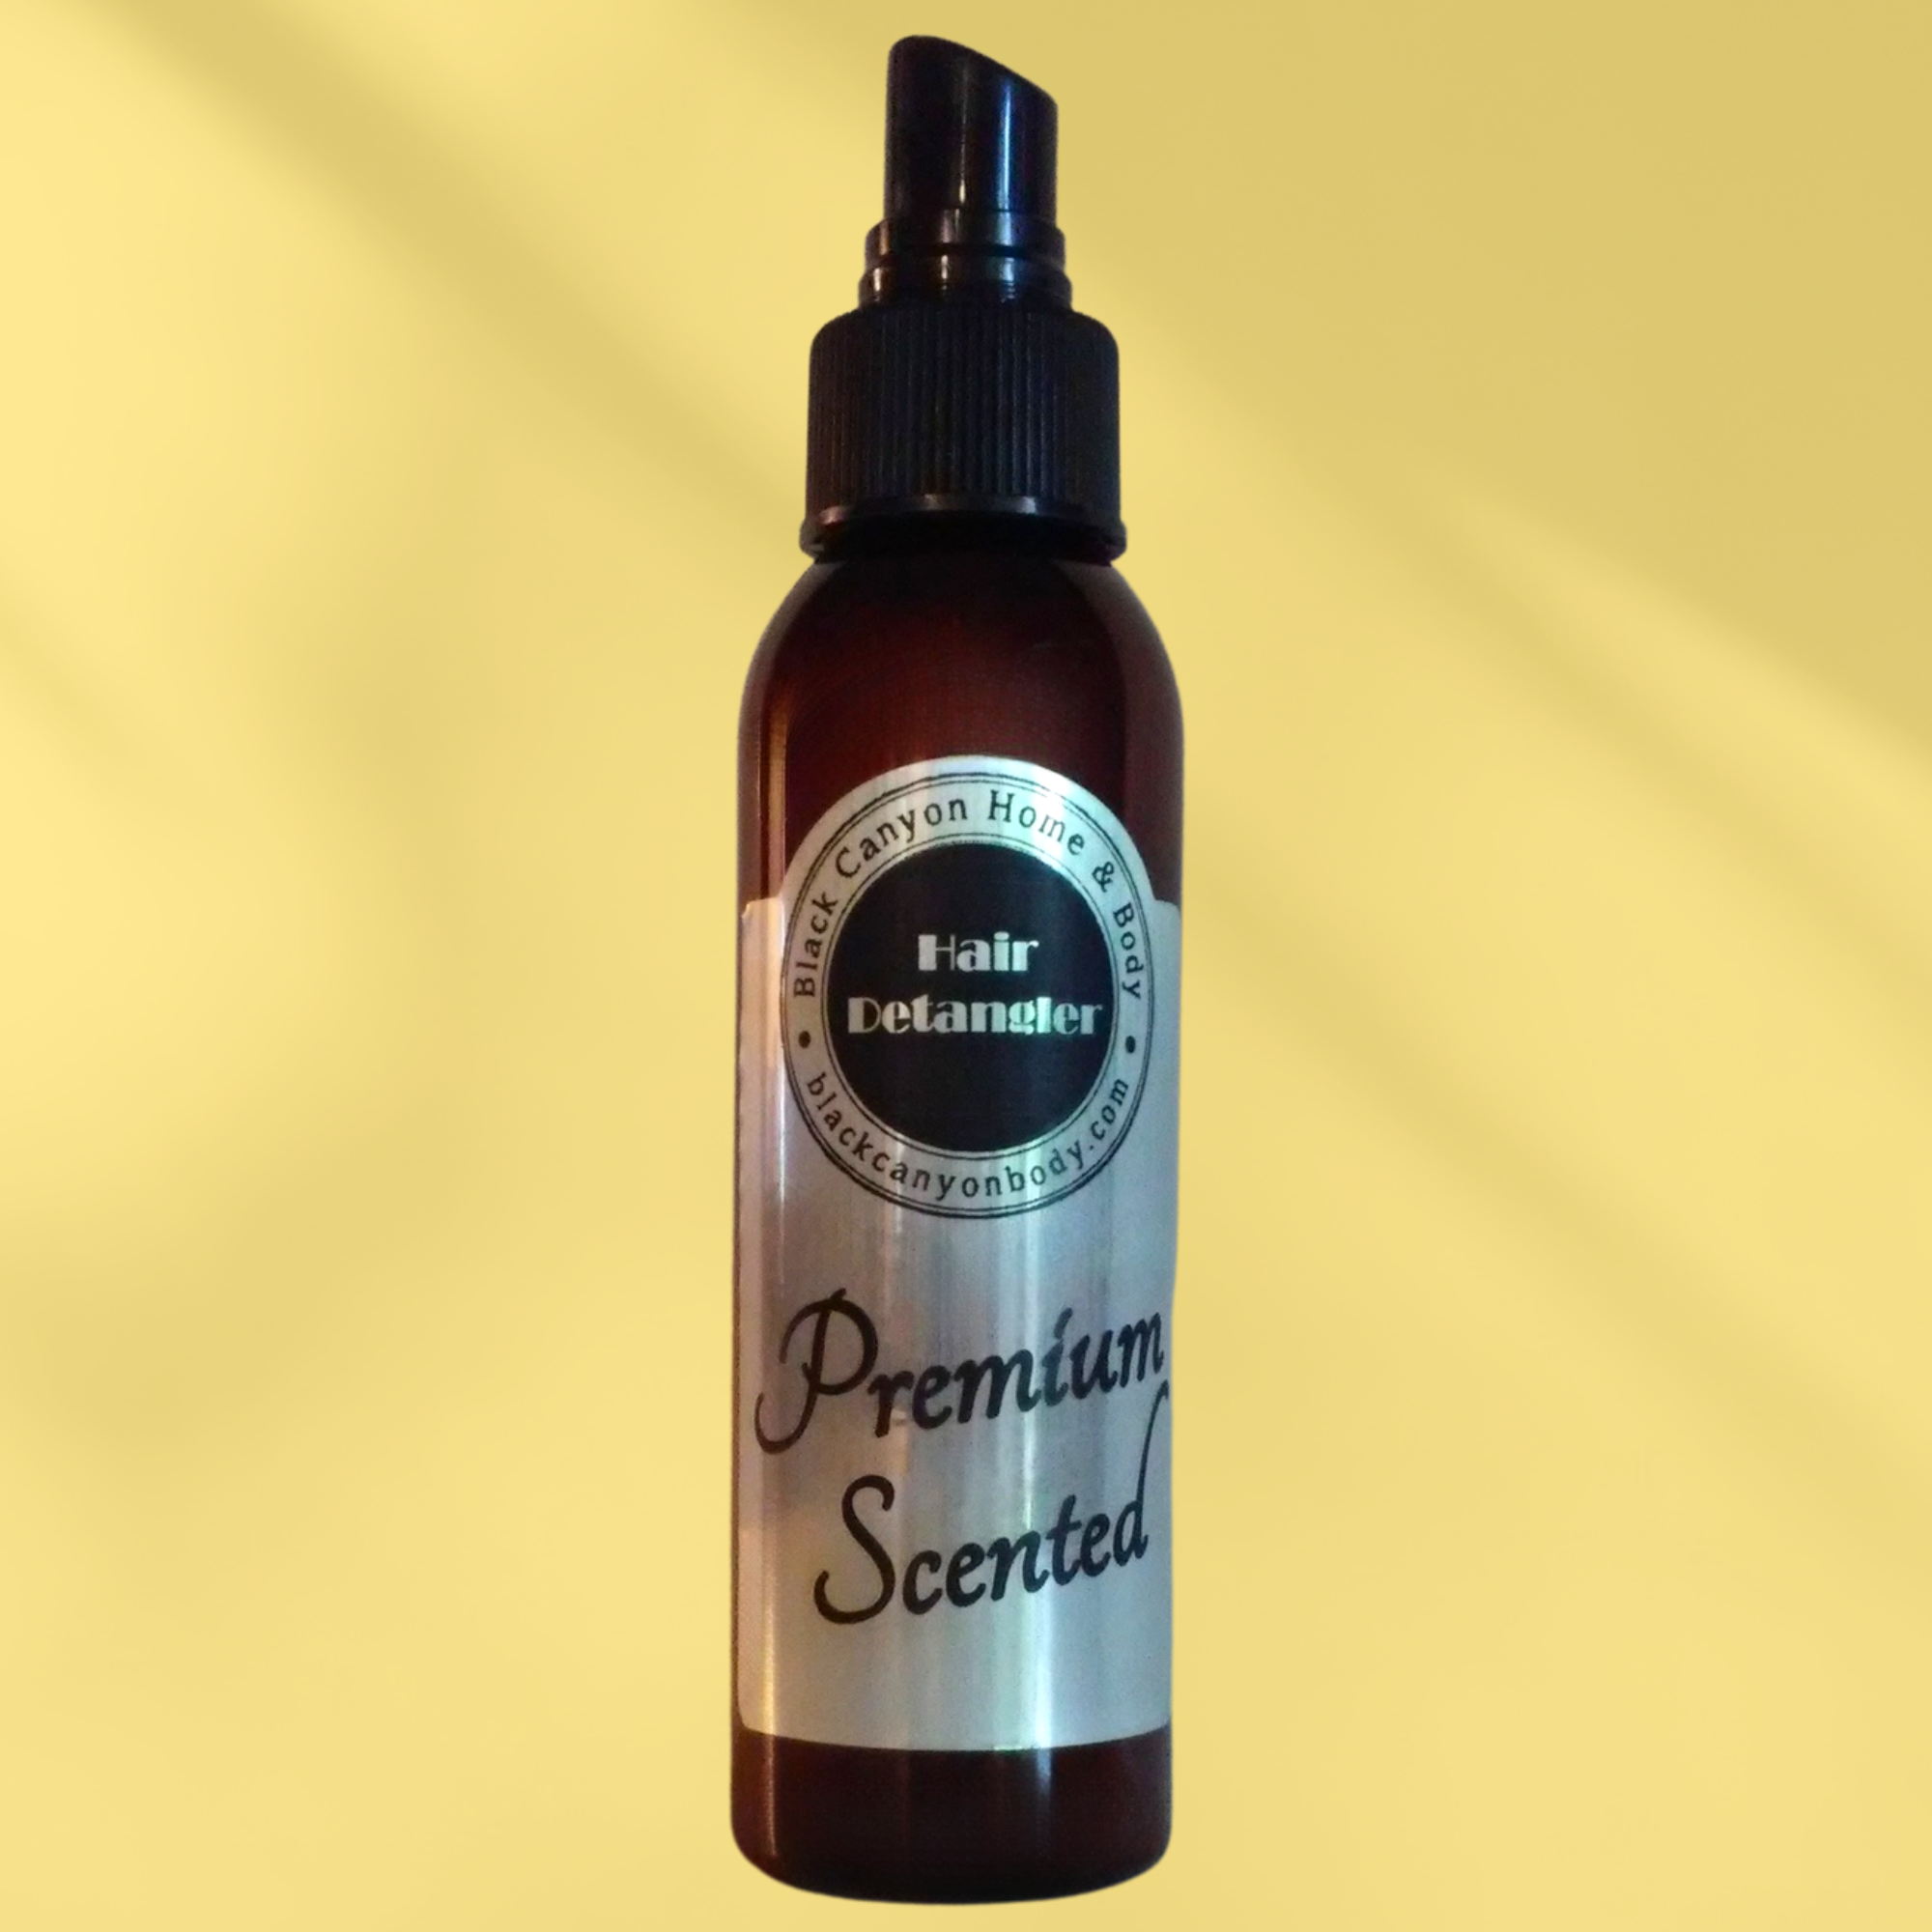 Black Canyon Juicy Green Apple & Lychee Scented Hair Detangler Spray with Olive Oil